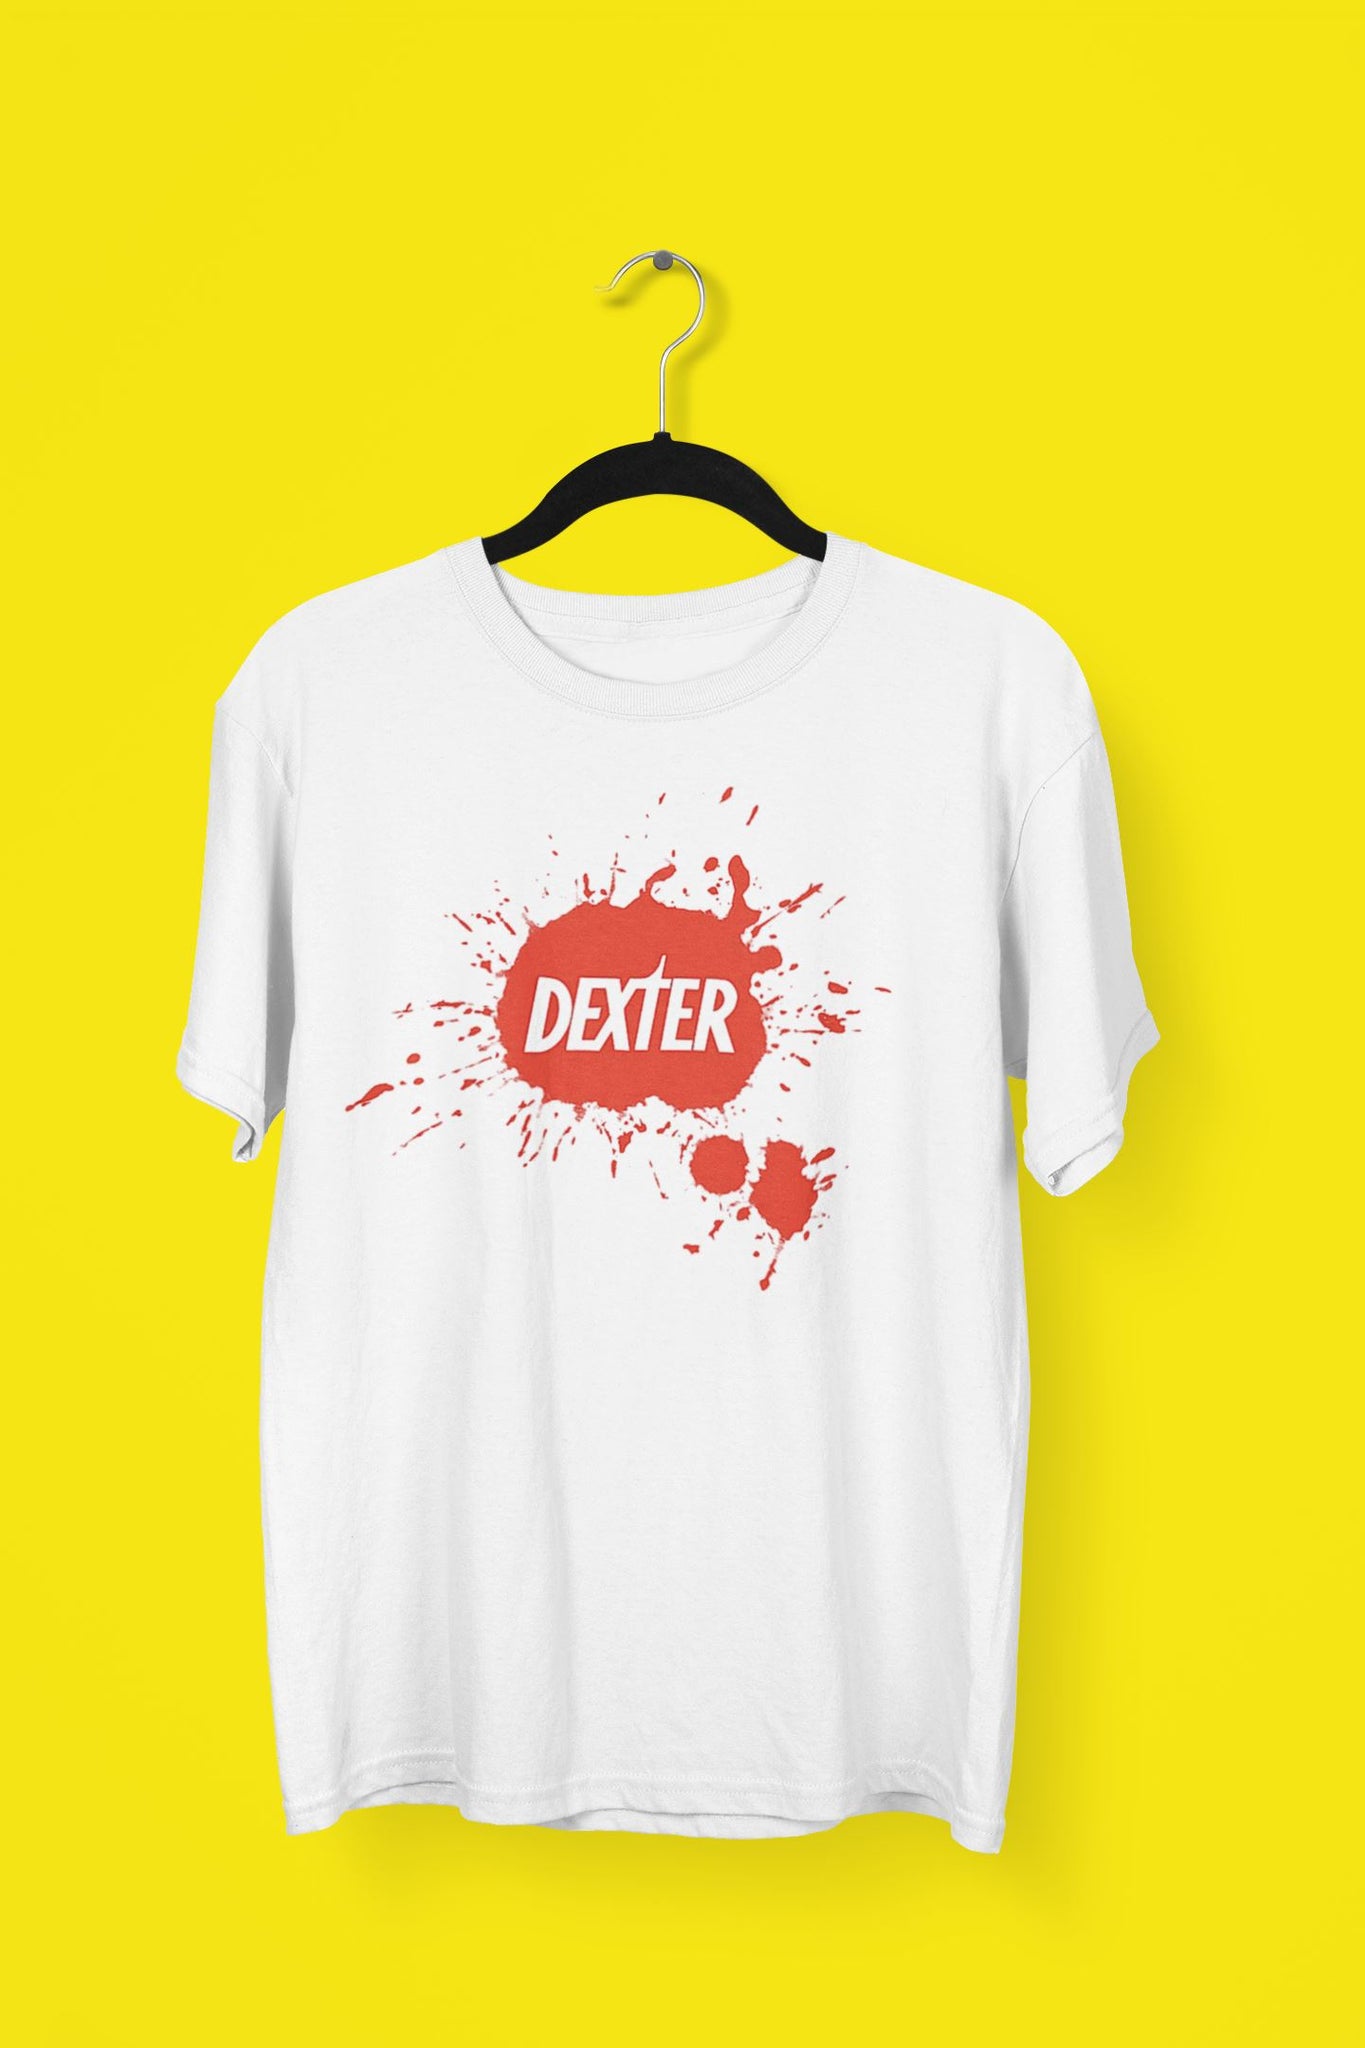 Dexter Blood Spatter Official White T Shirt for Men and Women freeshipping - Catch My Drift India